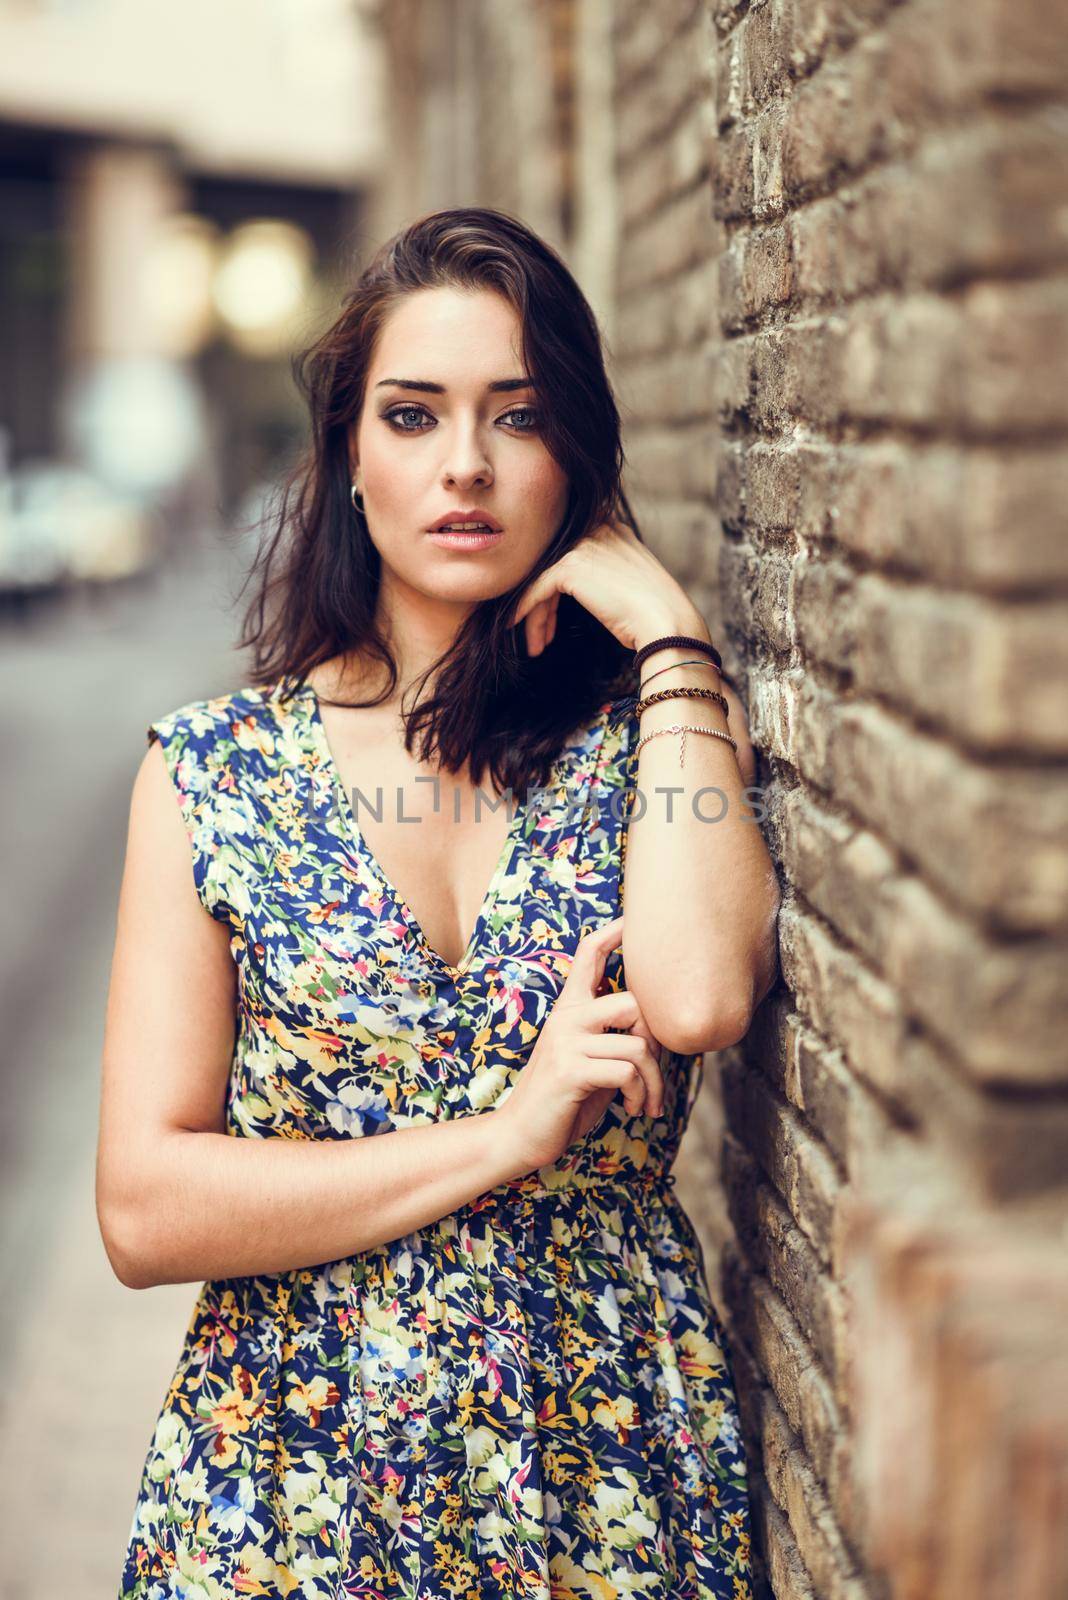 Girl with blue eyes standing next to brick wall outdoors. Young woman in her twenties wearing flower dress in urban background. Beauty and fashion concept.